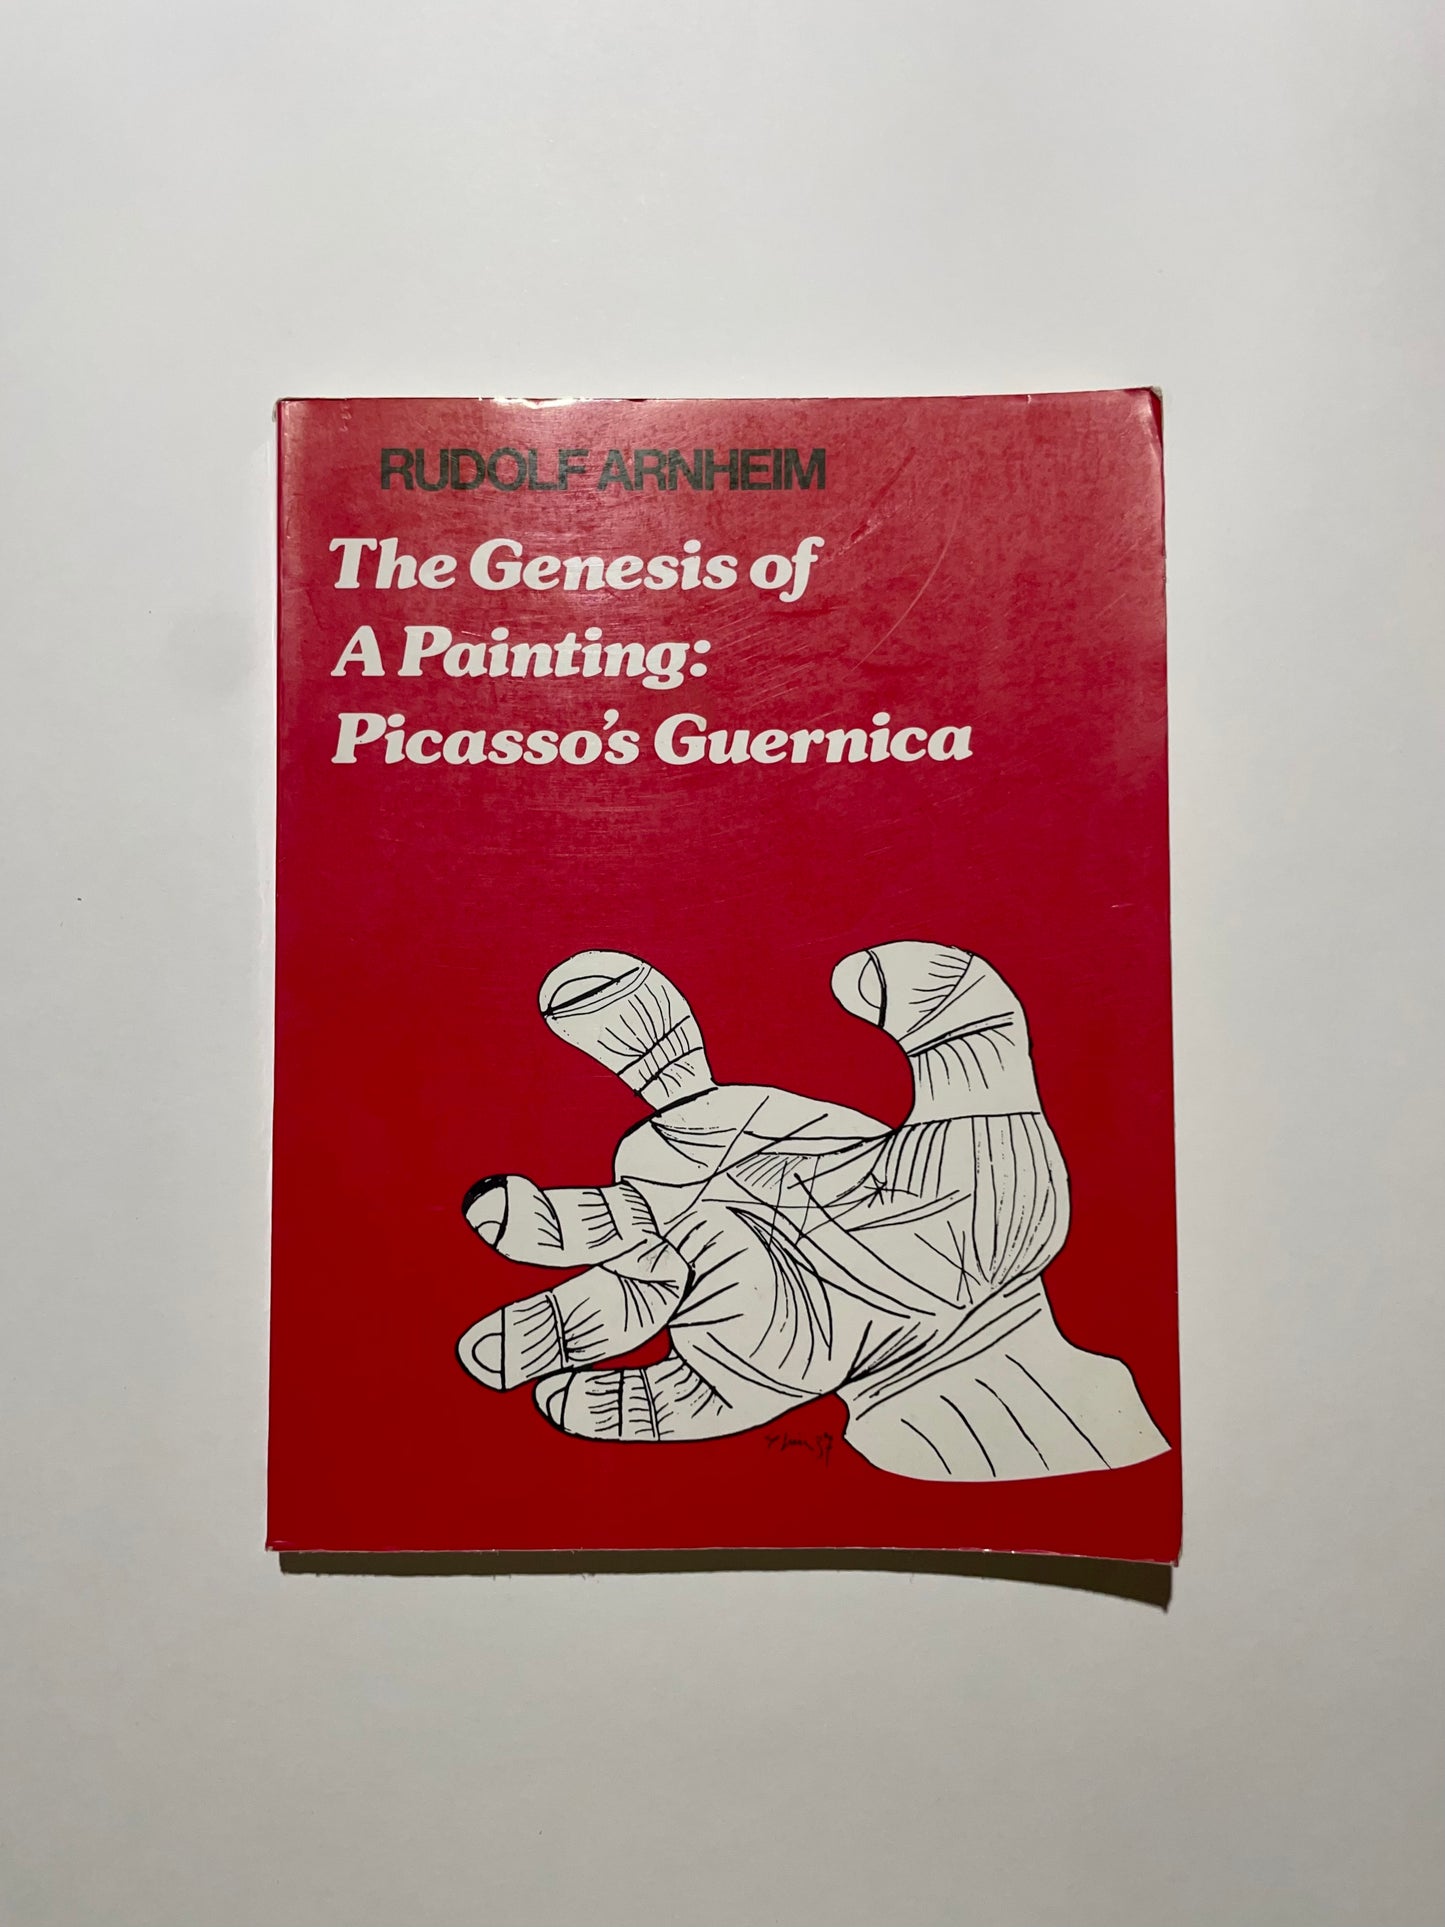 The Genesis of A Painting: Picasso's Guernica